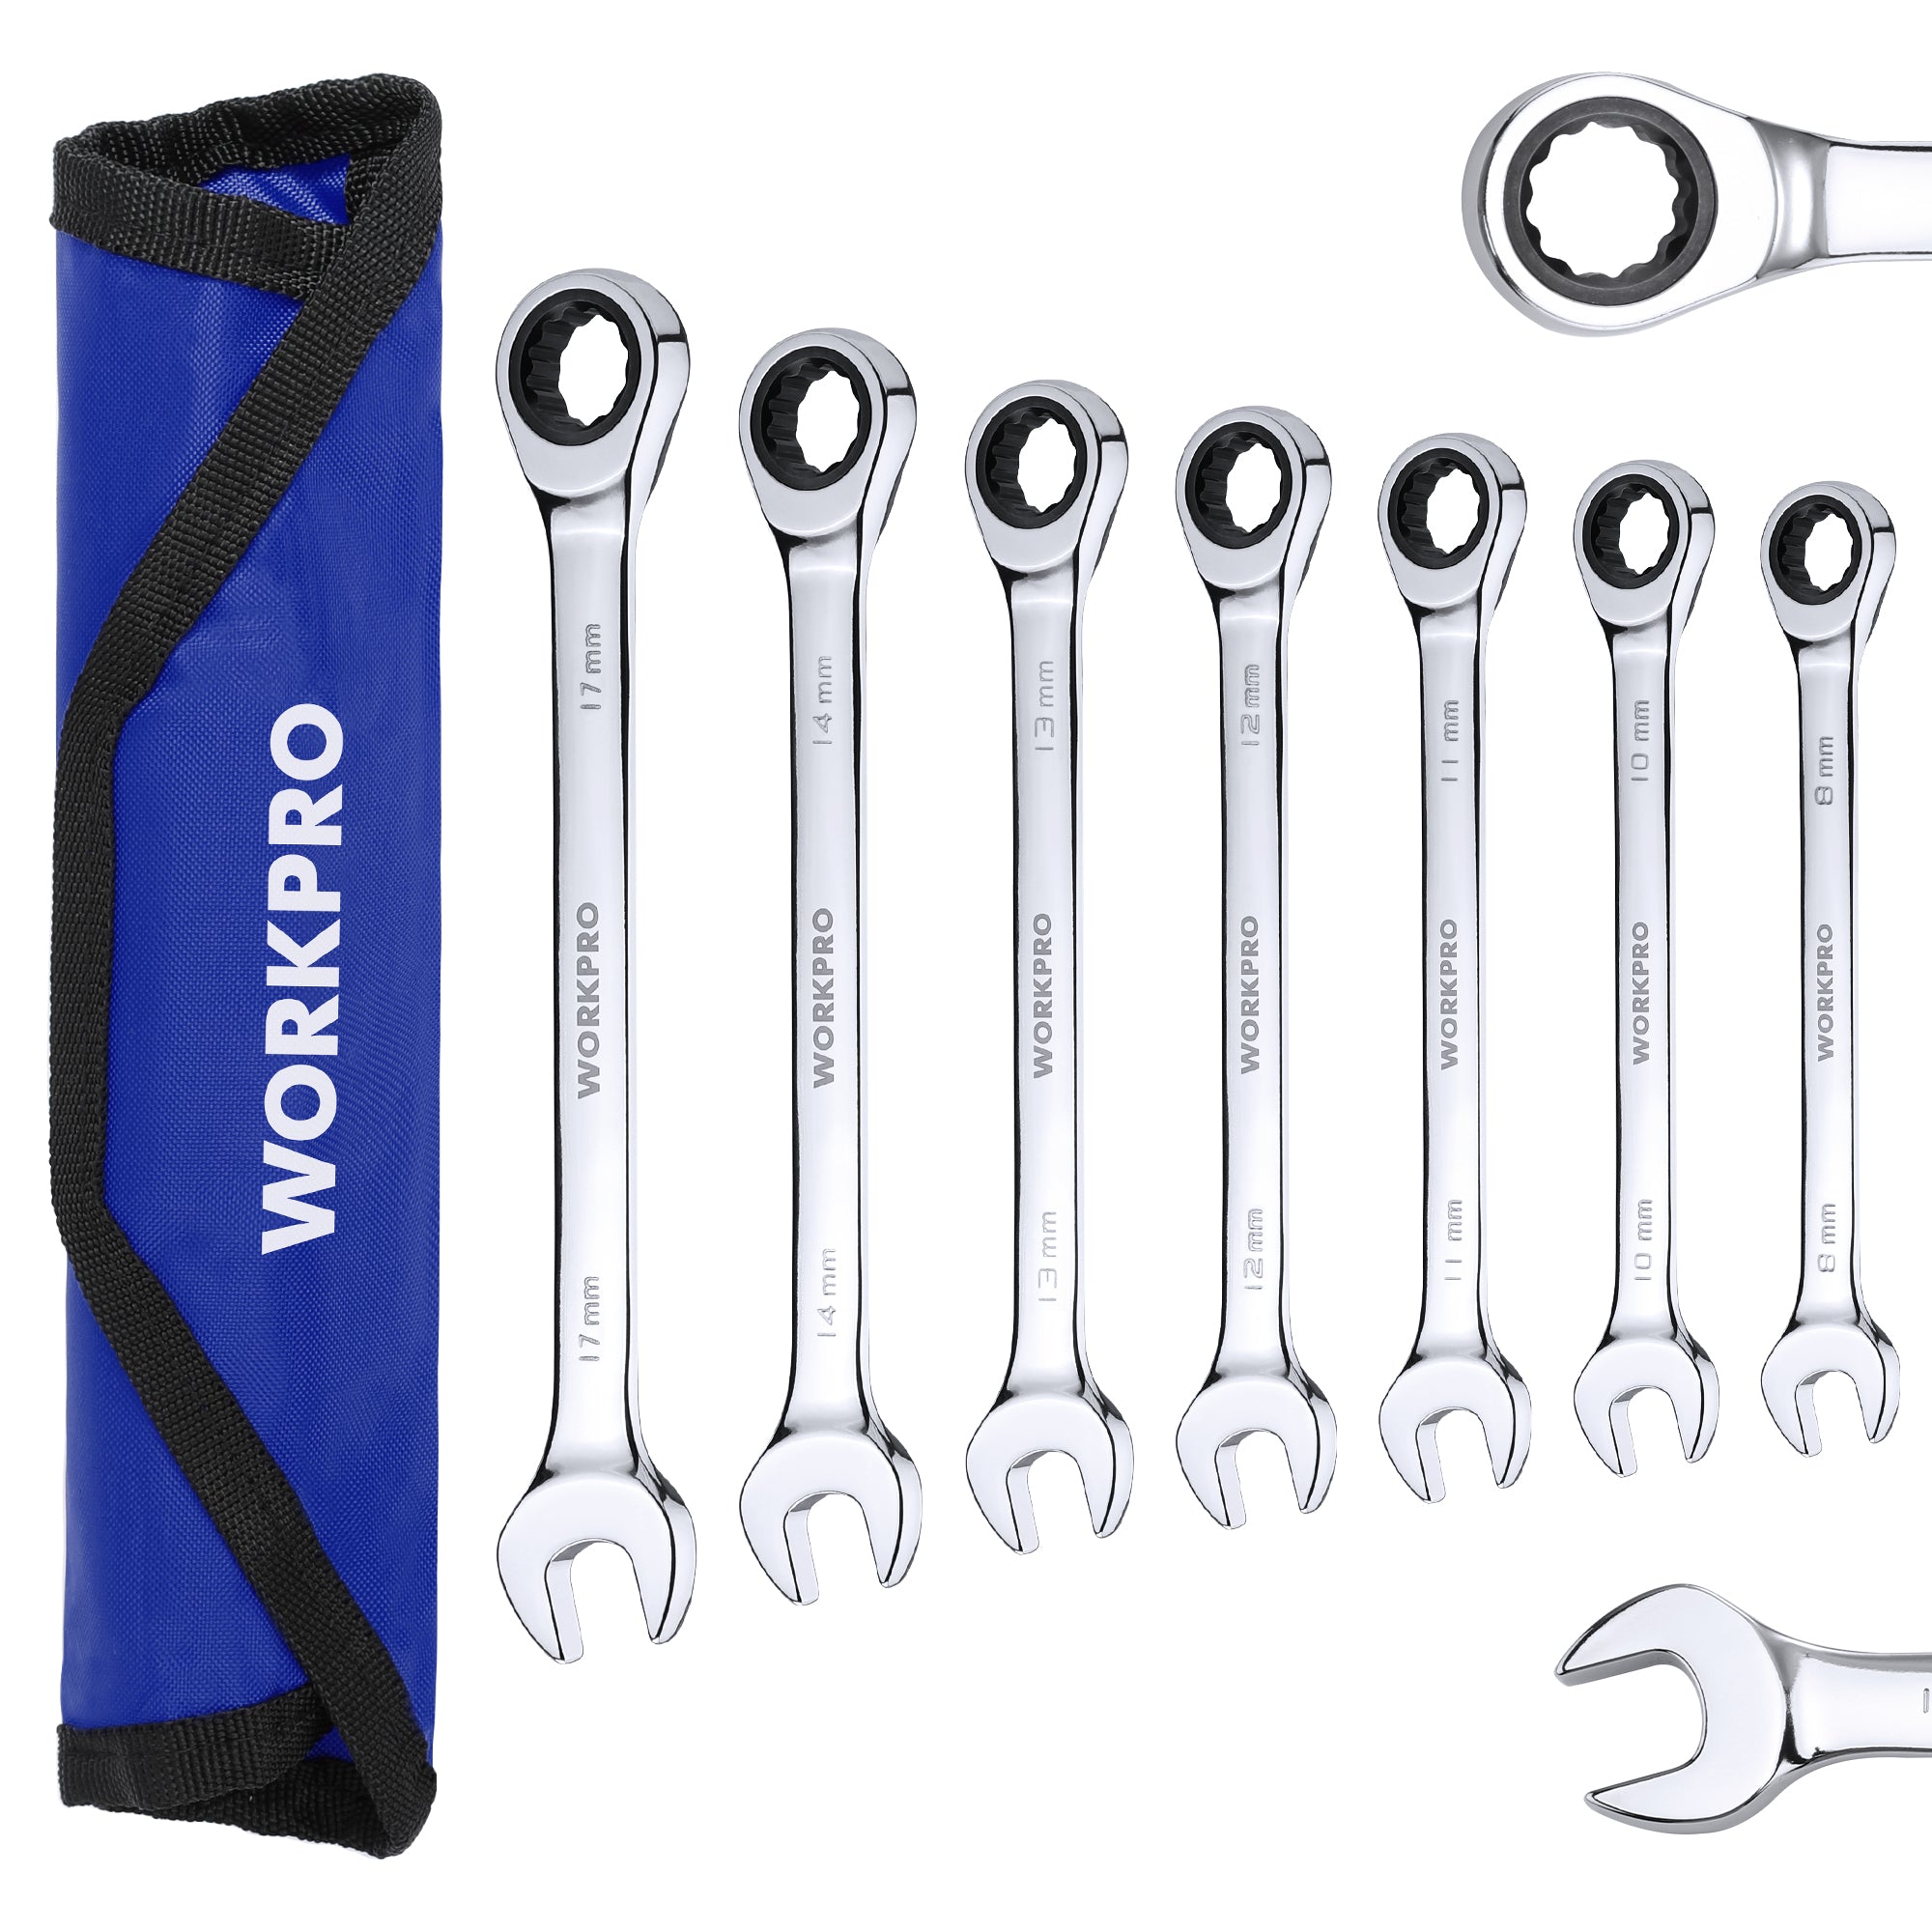 WORKPRO 7-Piece Ratcheting Combination Wrench Set, 72 Teeth